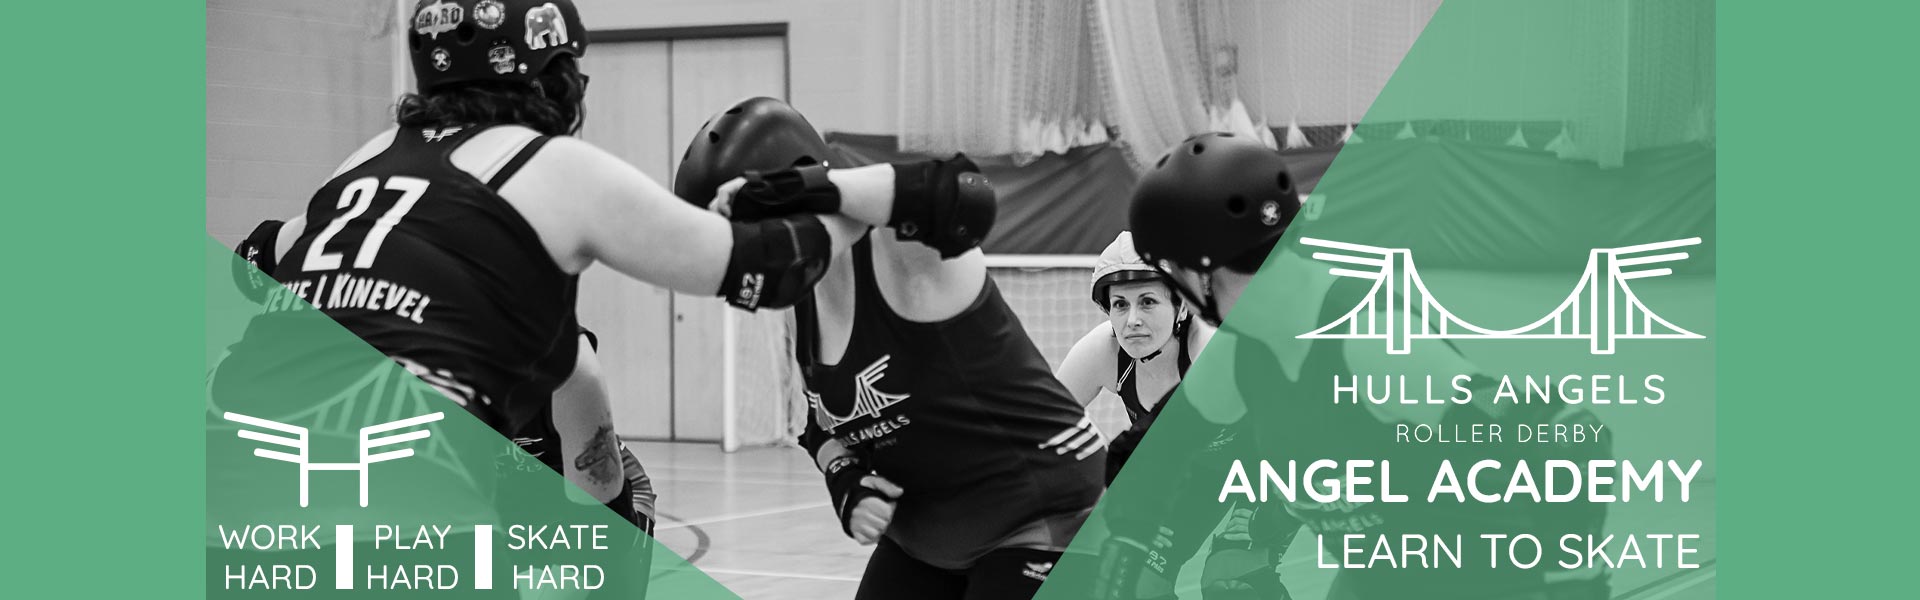 Keep checking back for the next date Hulls Angels Roller Derby - Banner 2